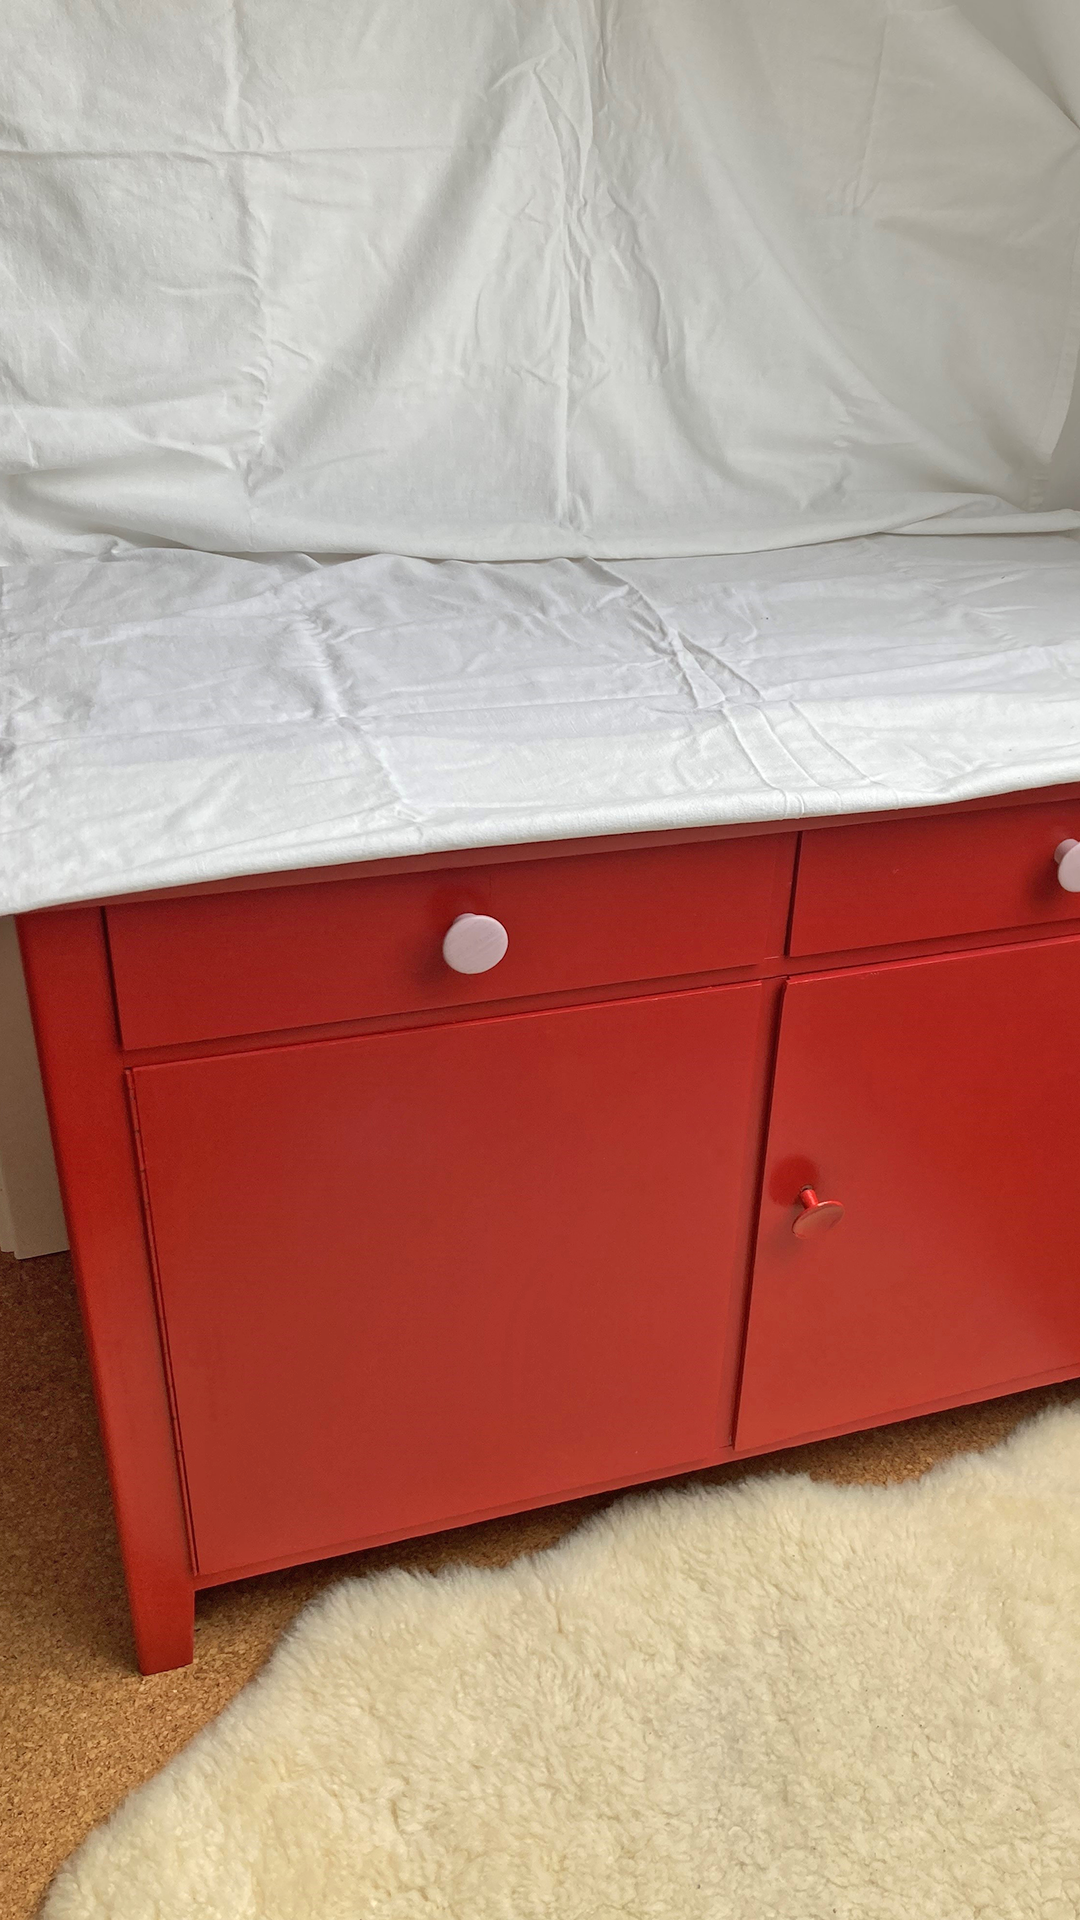 A red chest of drawers is covered in fabric with a lambskin in front of it.